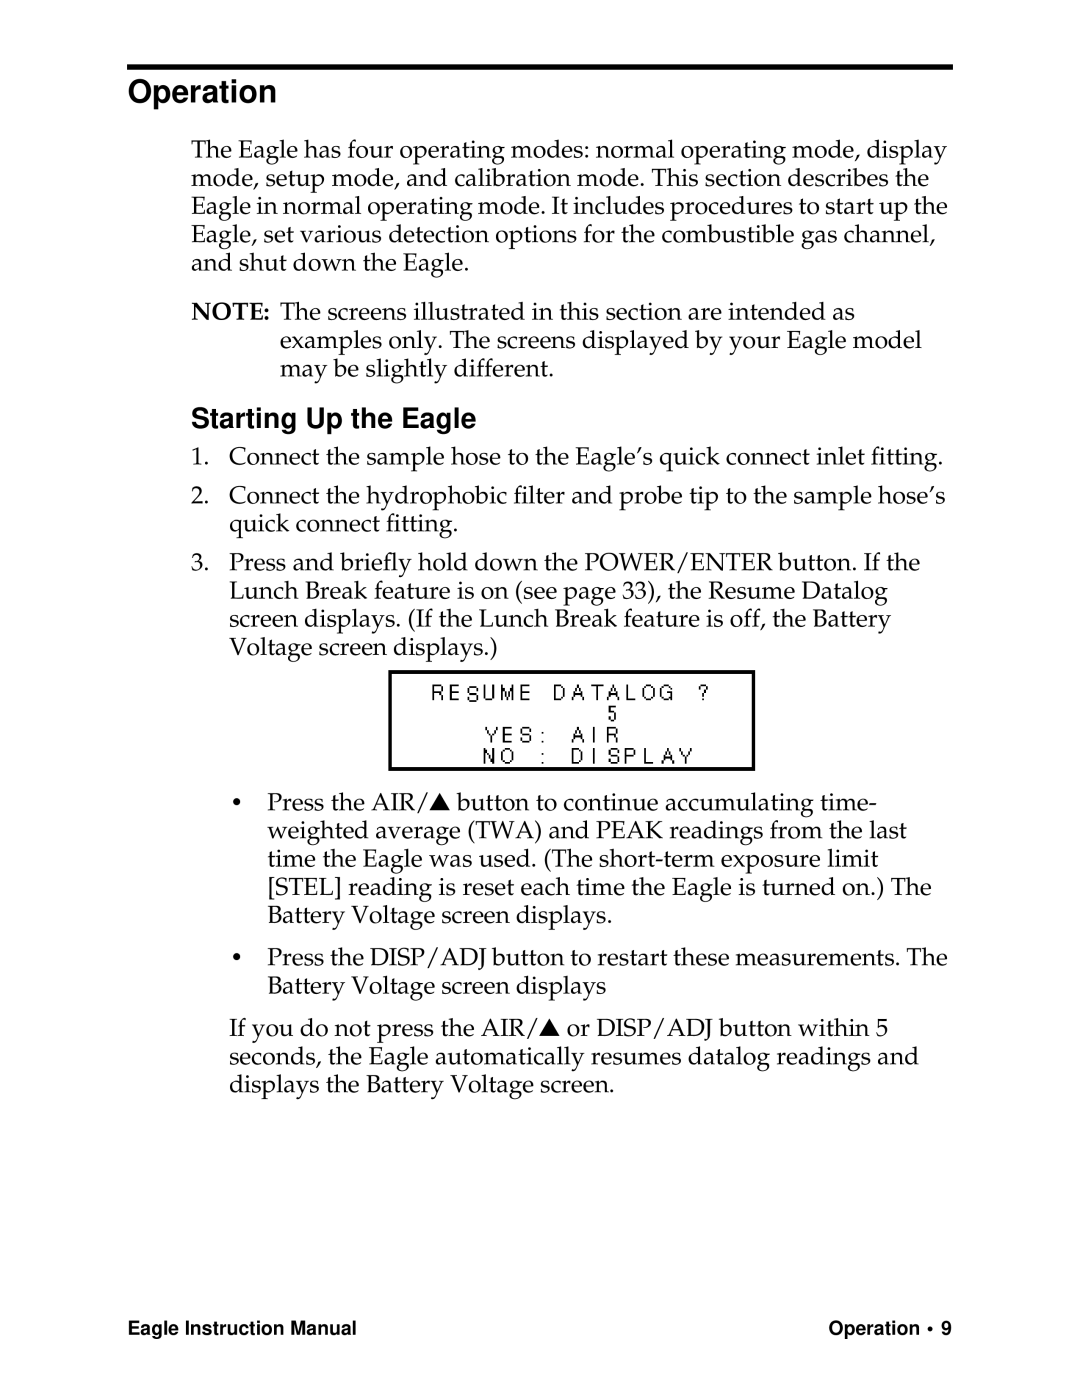 Eagle Home Products Eagle Series instruction manual Operation, Starting Up the Eagle 